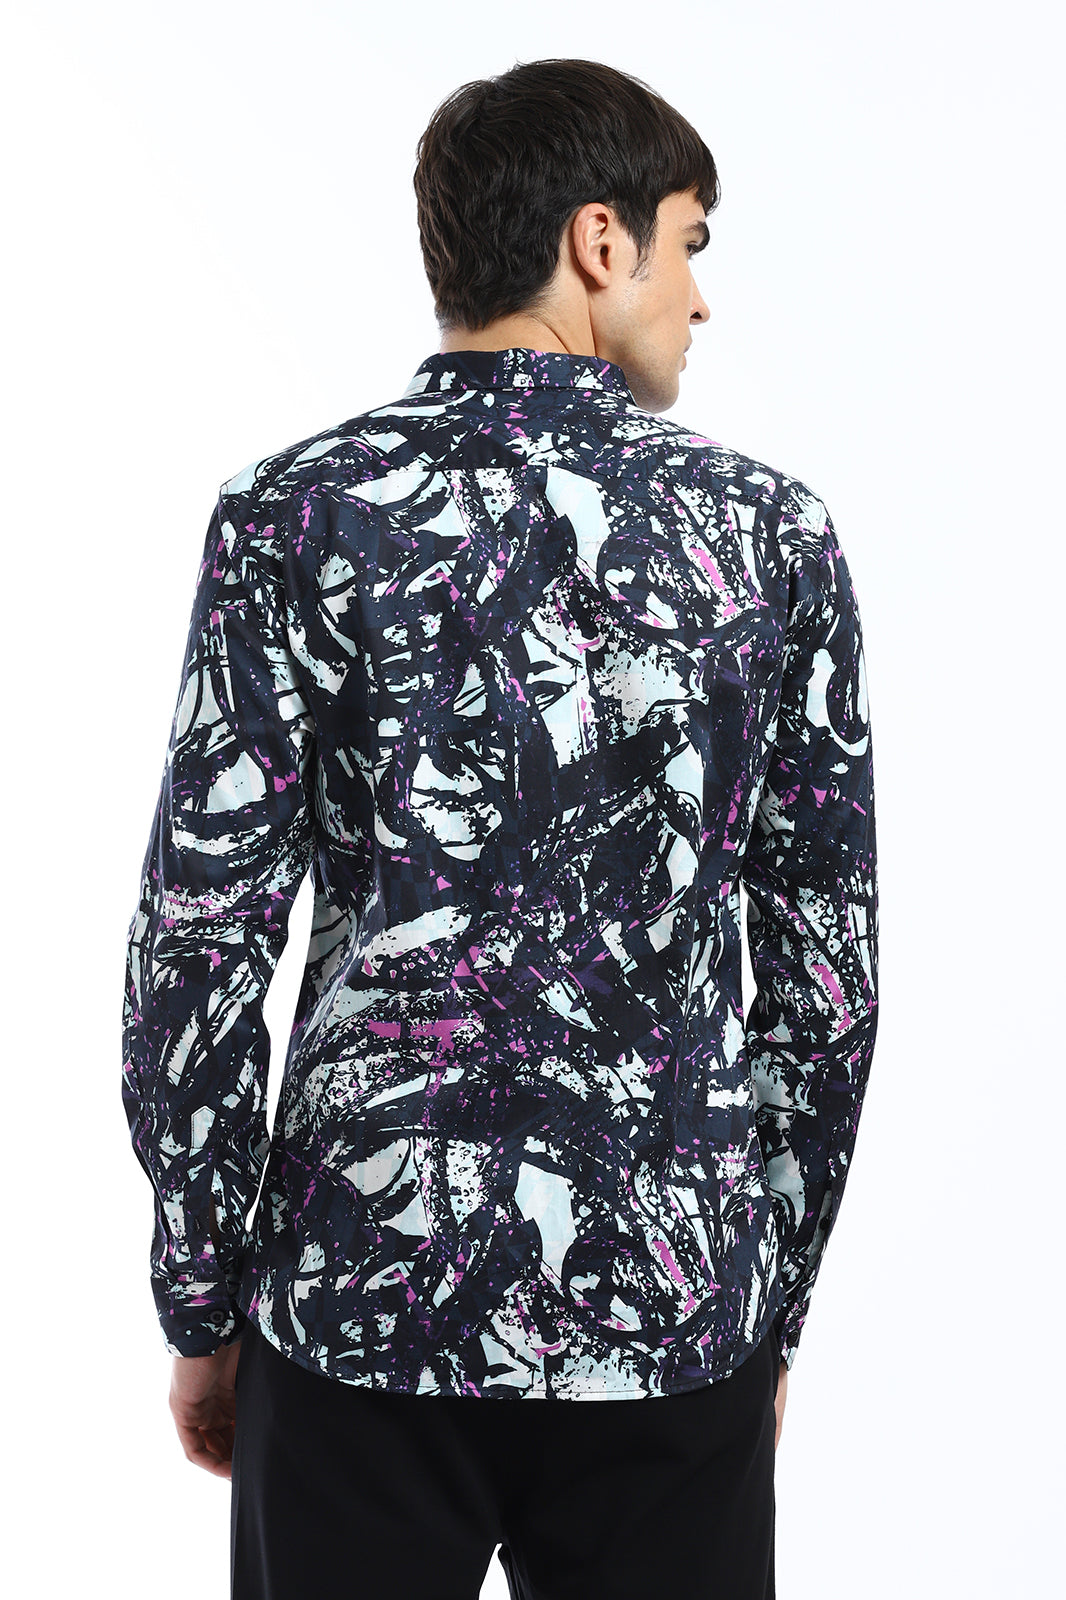 Contempory Marble Printed Shirt